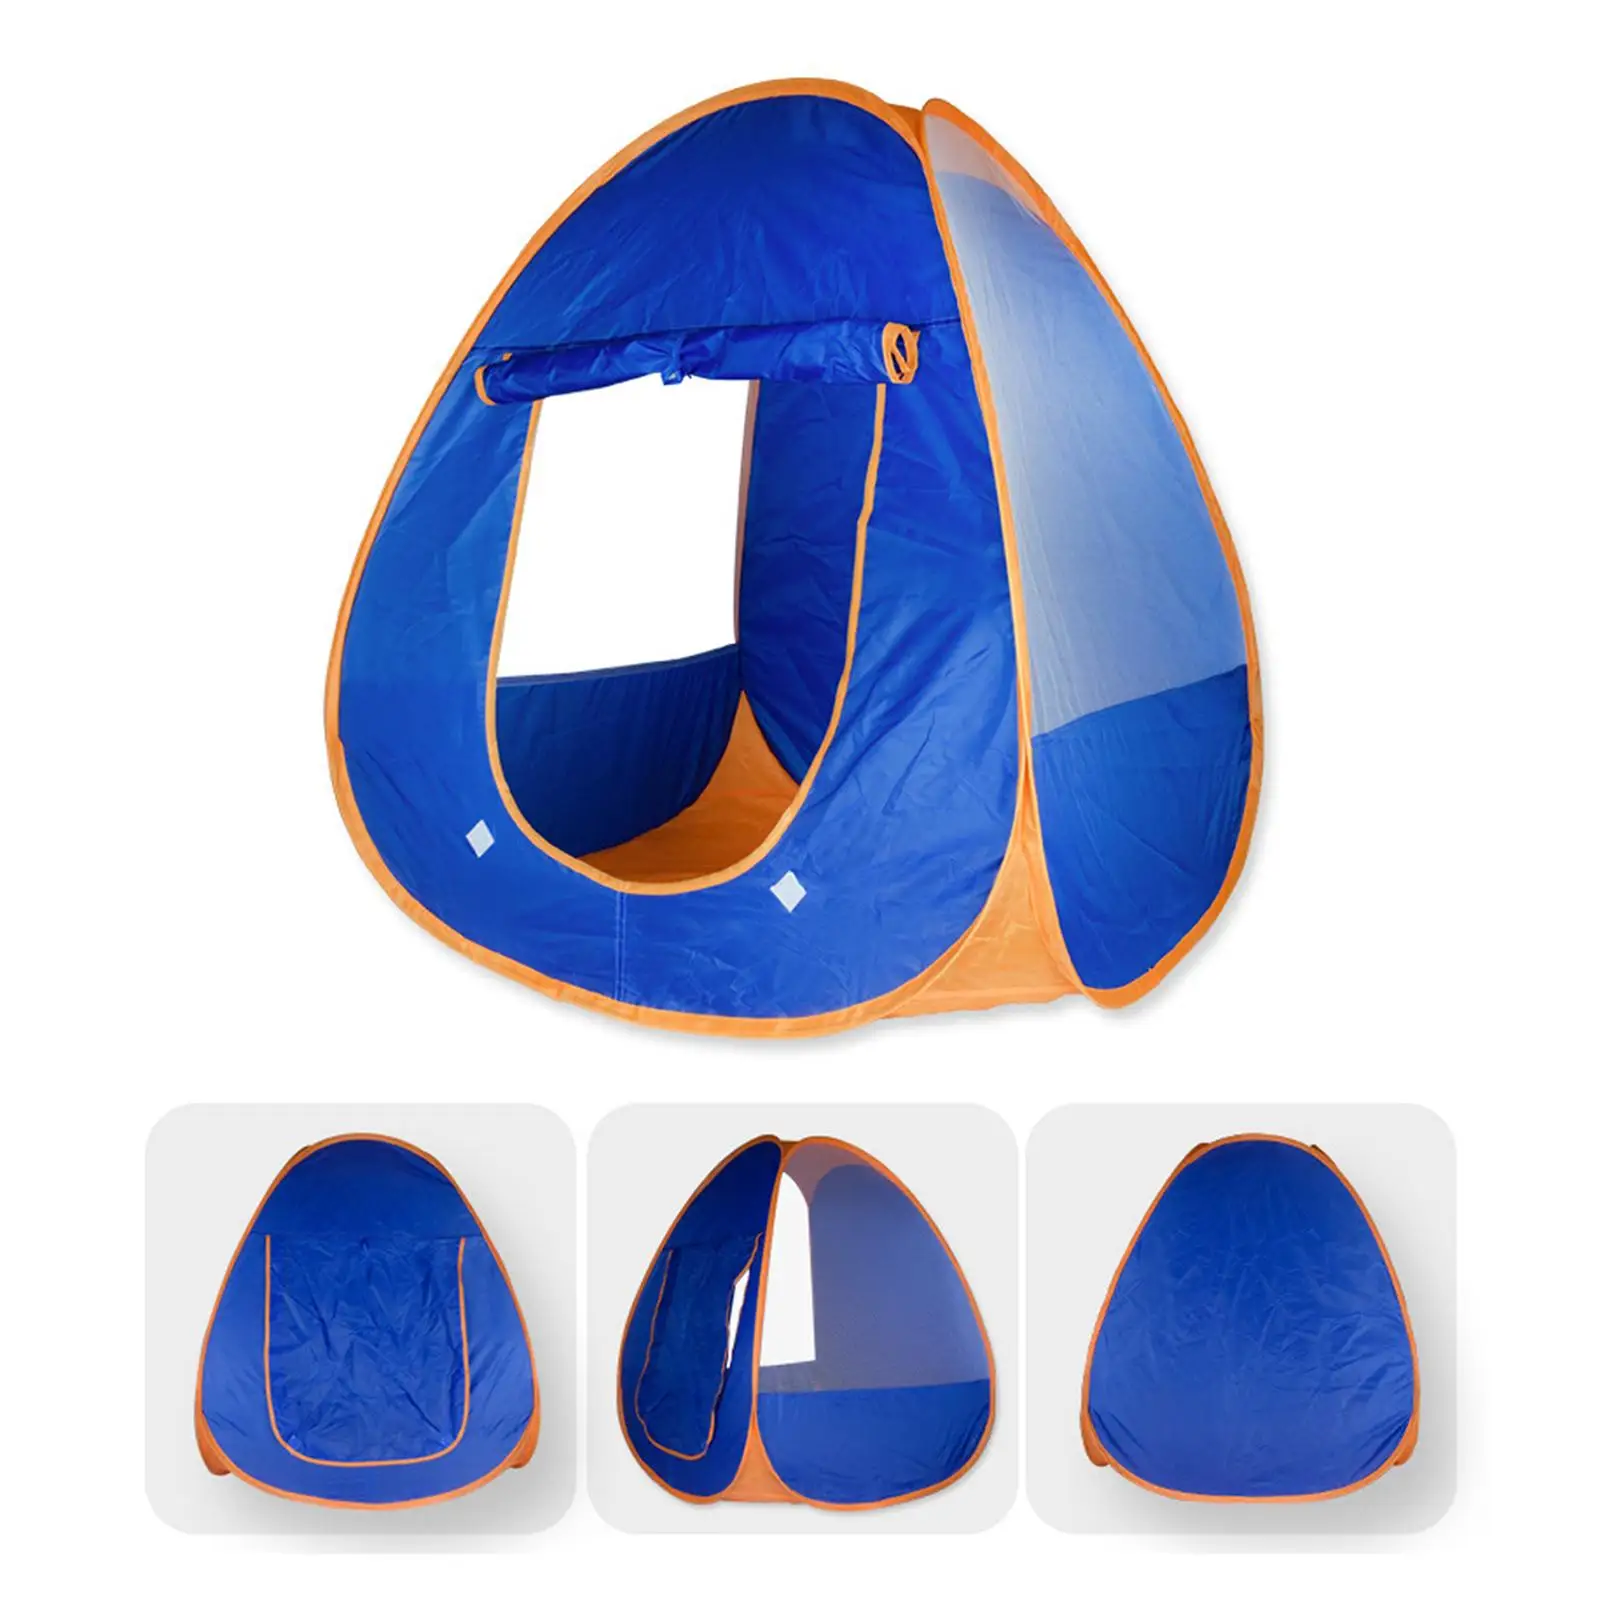 Children Play Tent Foldable Boys Girls Pretend Play for Camping Beach Party